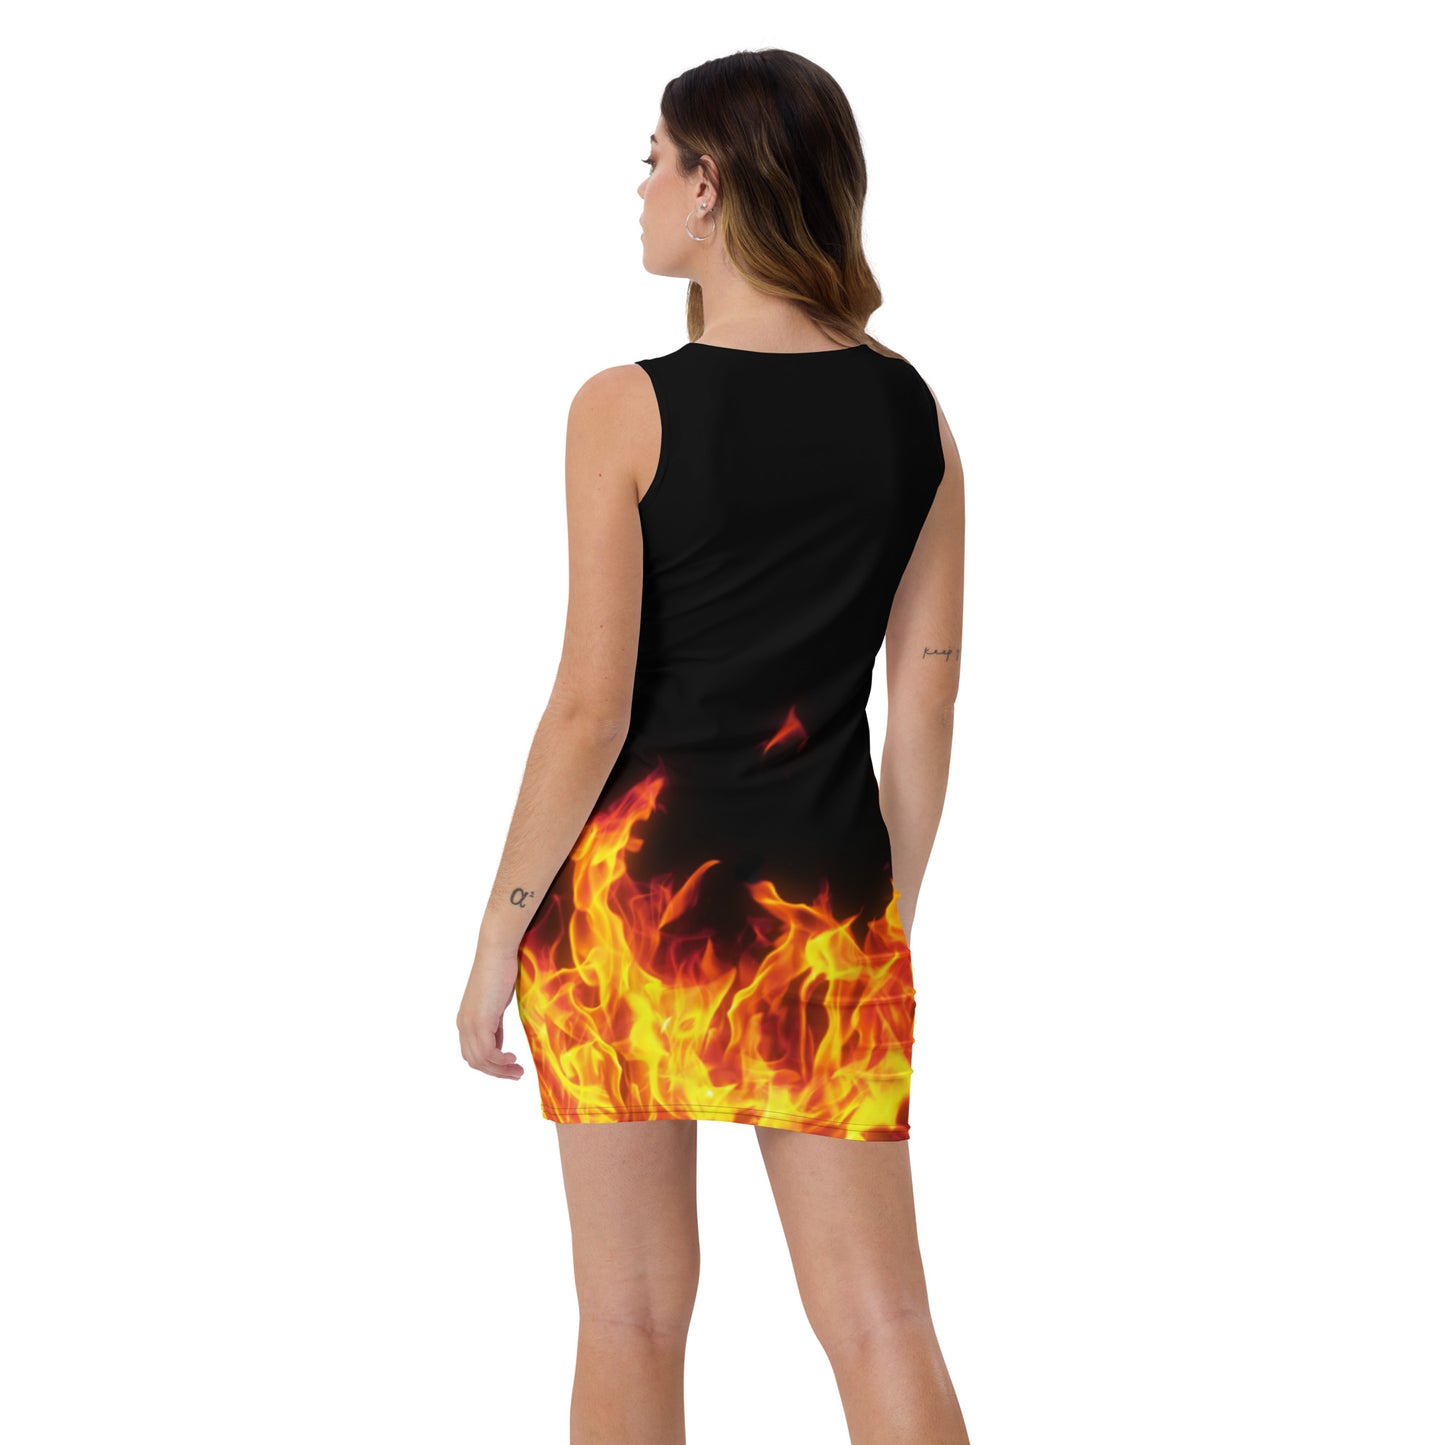 Perfect Imperfection flame dress.